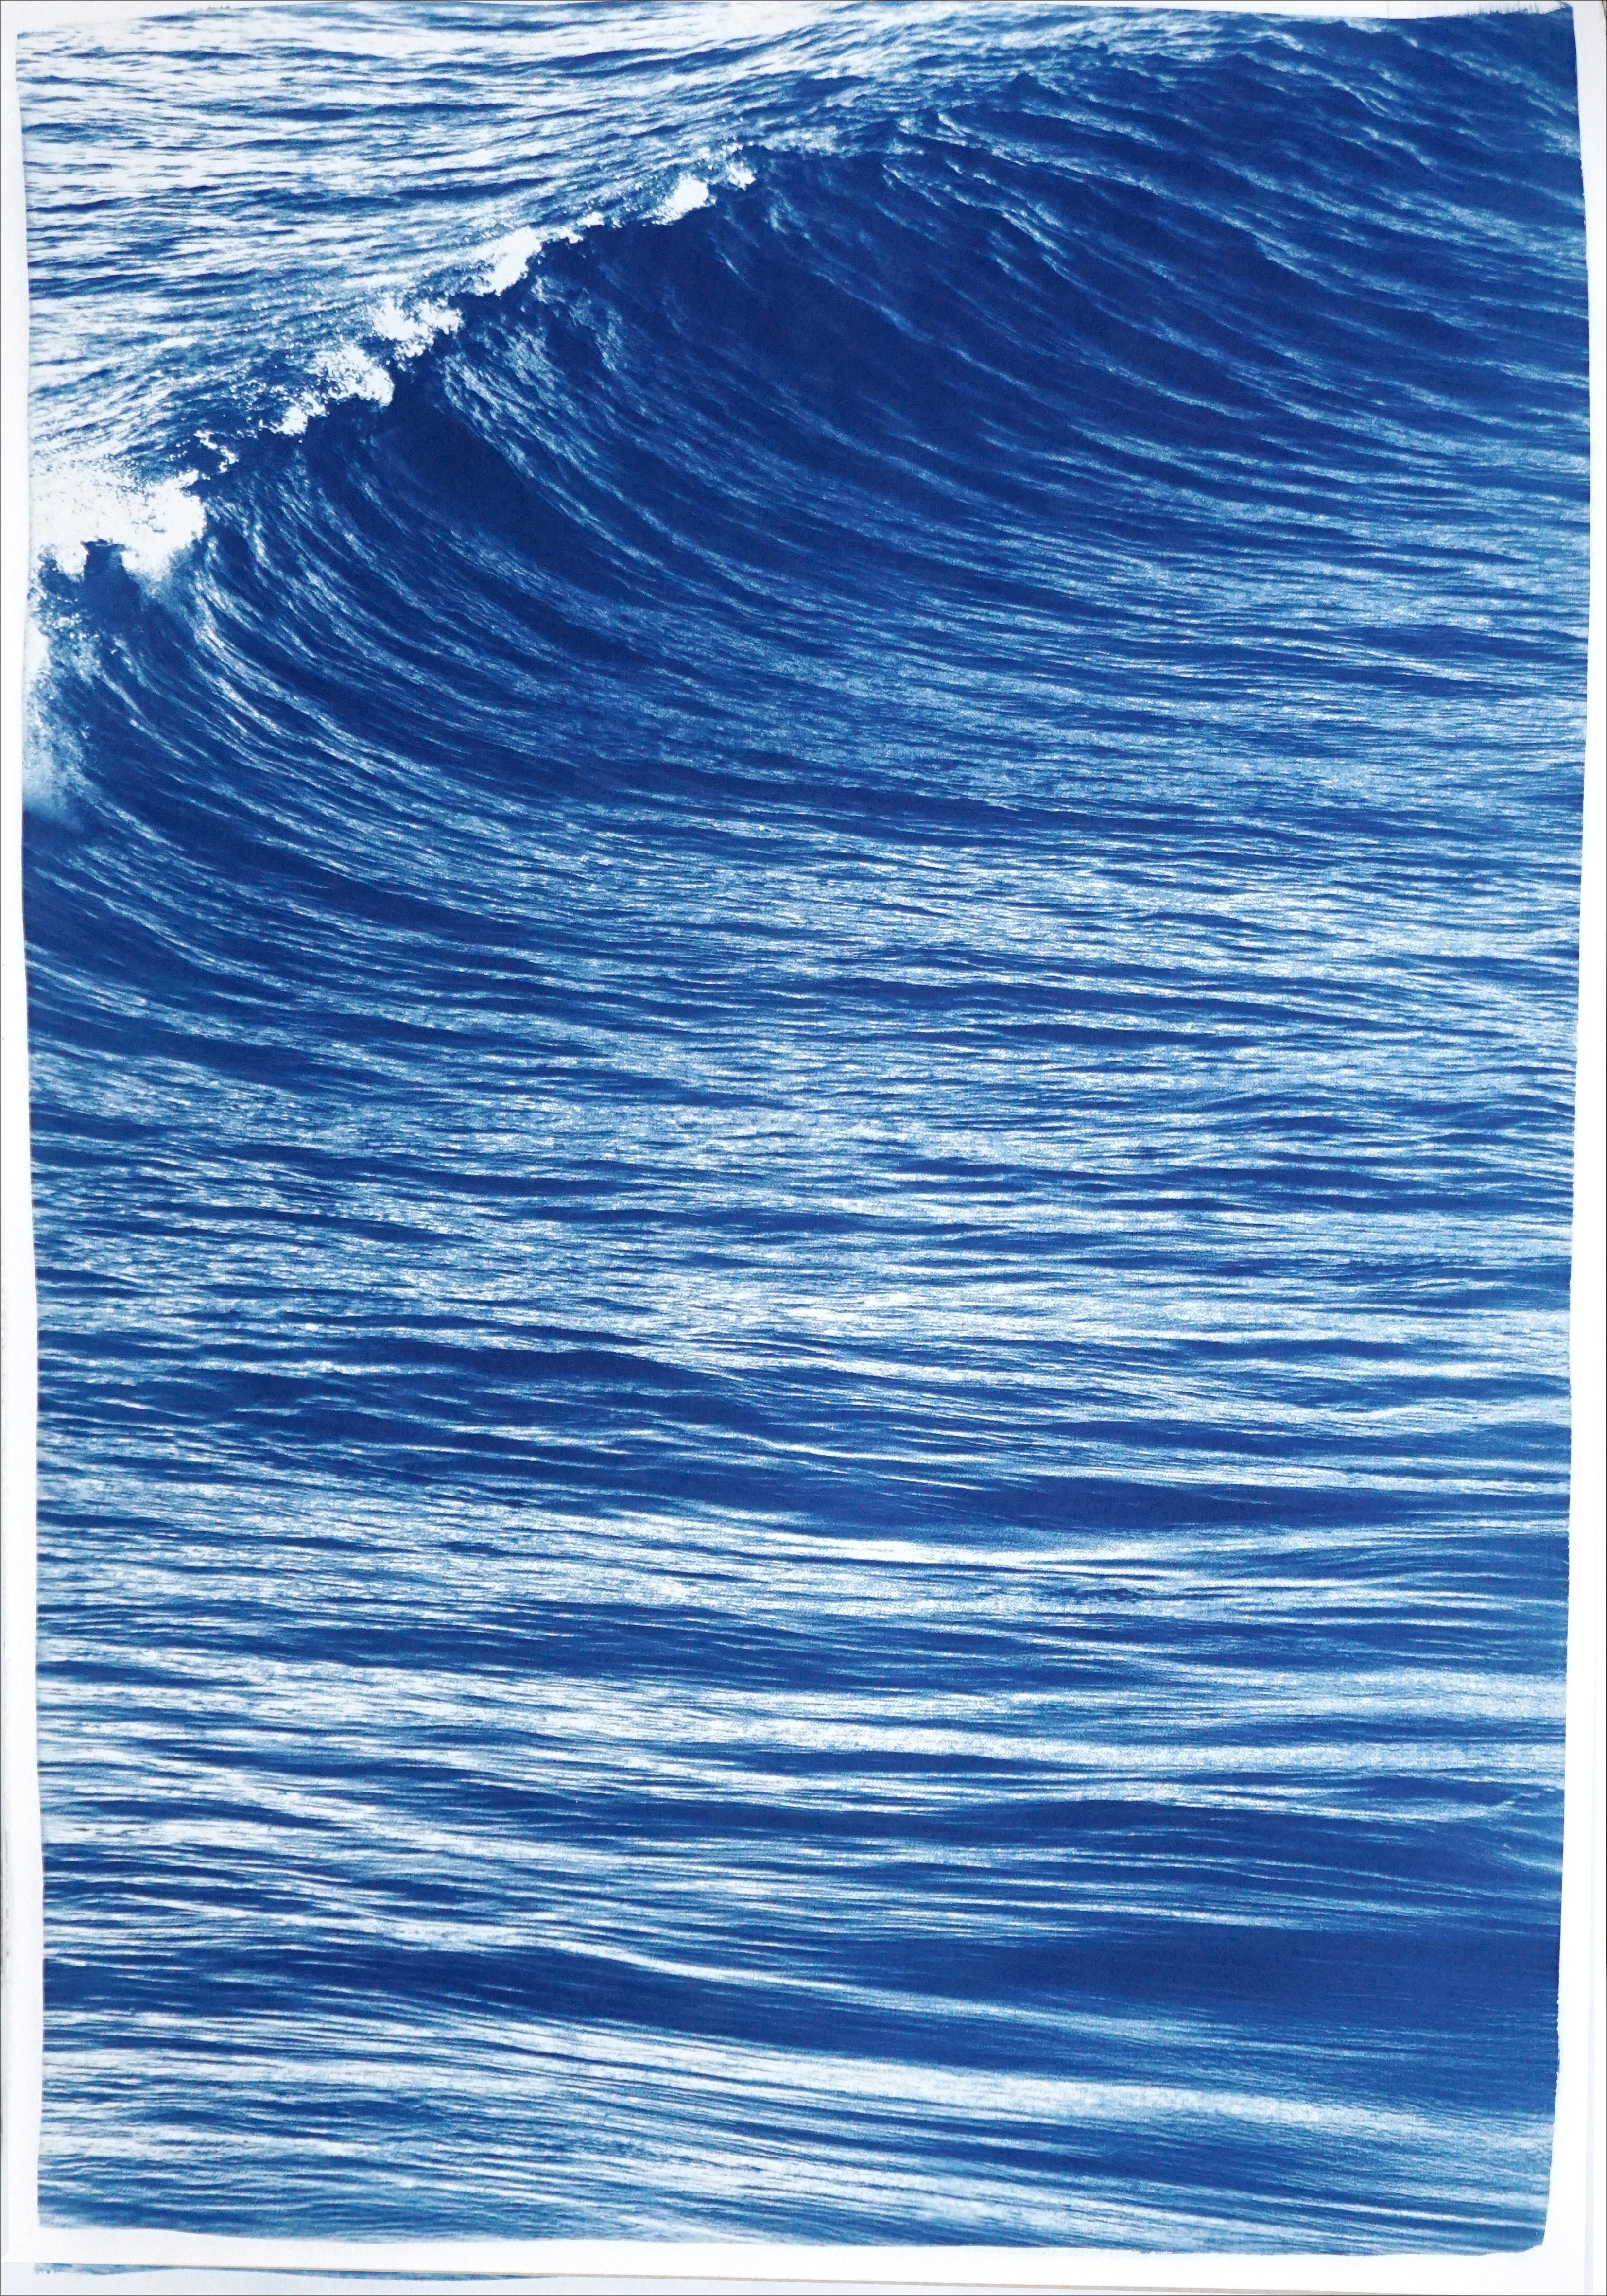 This is an exclusive handprinted limited edition cyanotype.

This gorgeous triptych shows a vigorous crashing wave off Los Angeles Coast. 

Details:
+ Title: Los Angeles Crashing Wave 
+ Year: 2022
+ Edition Size: 100
+ Stamped and Certificate of